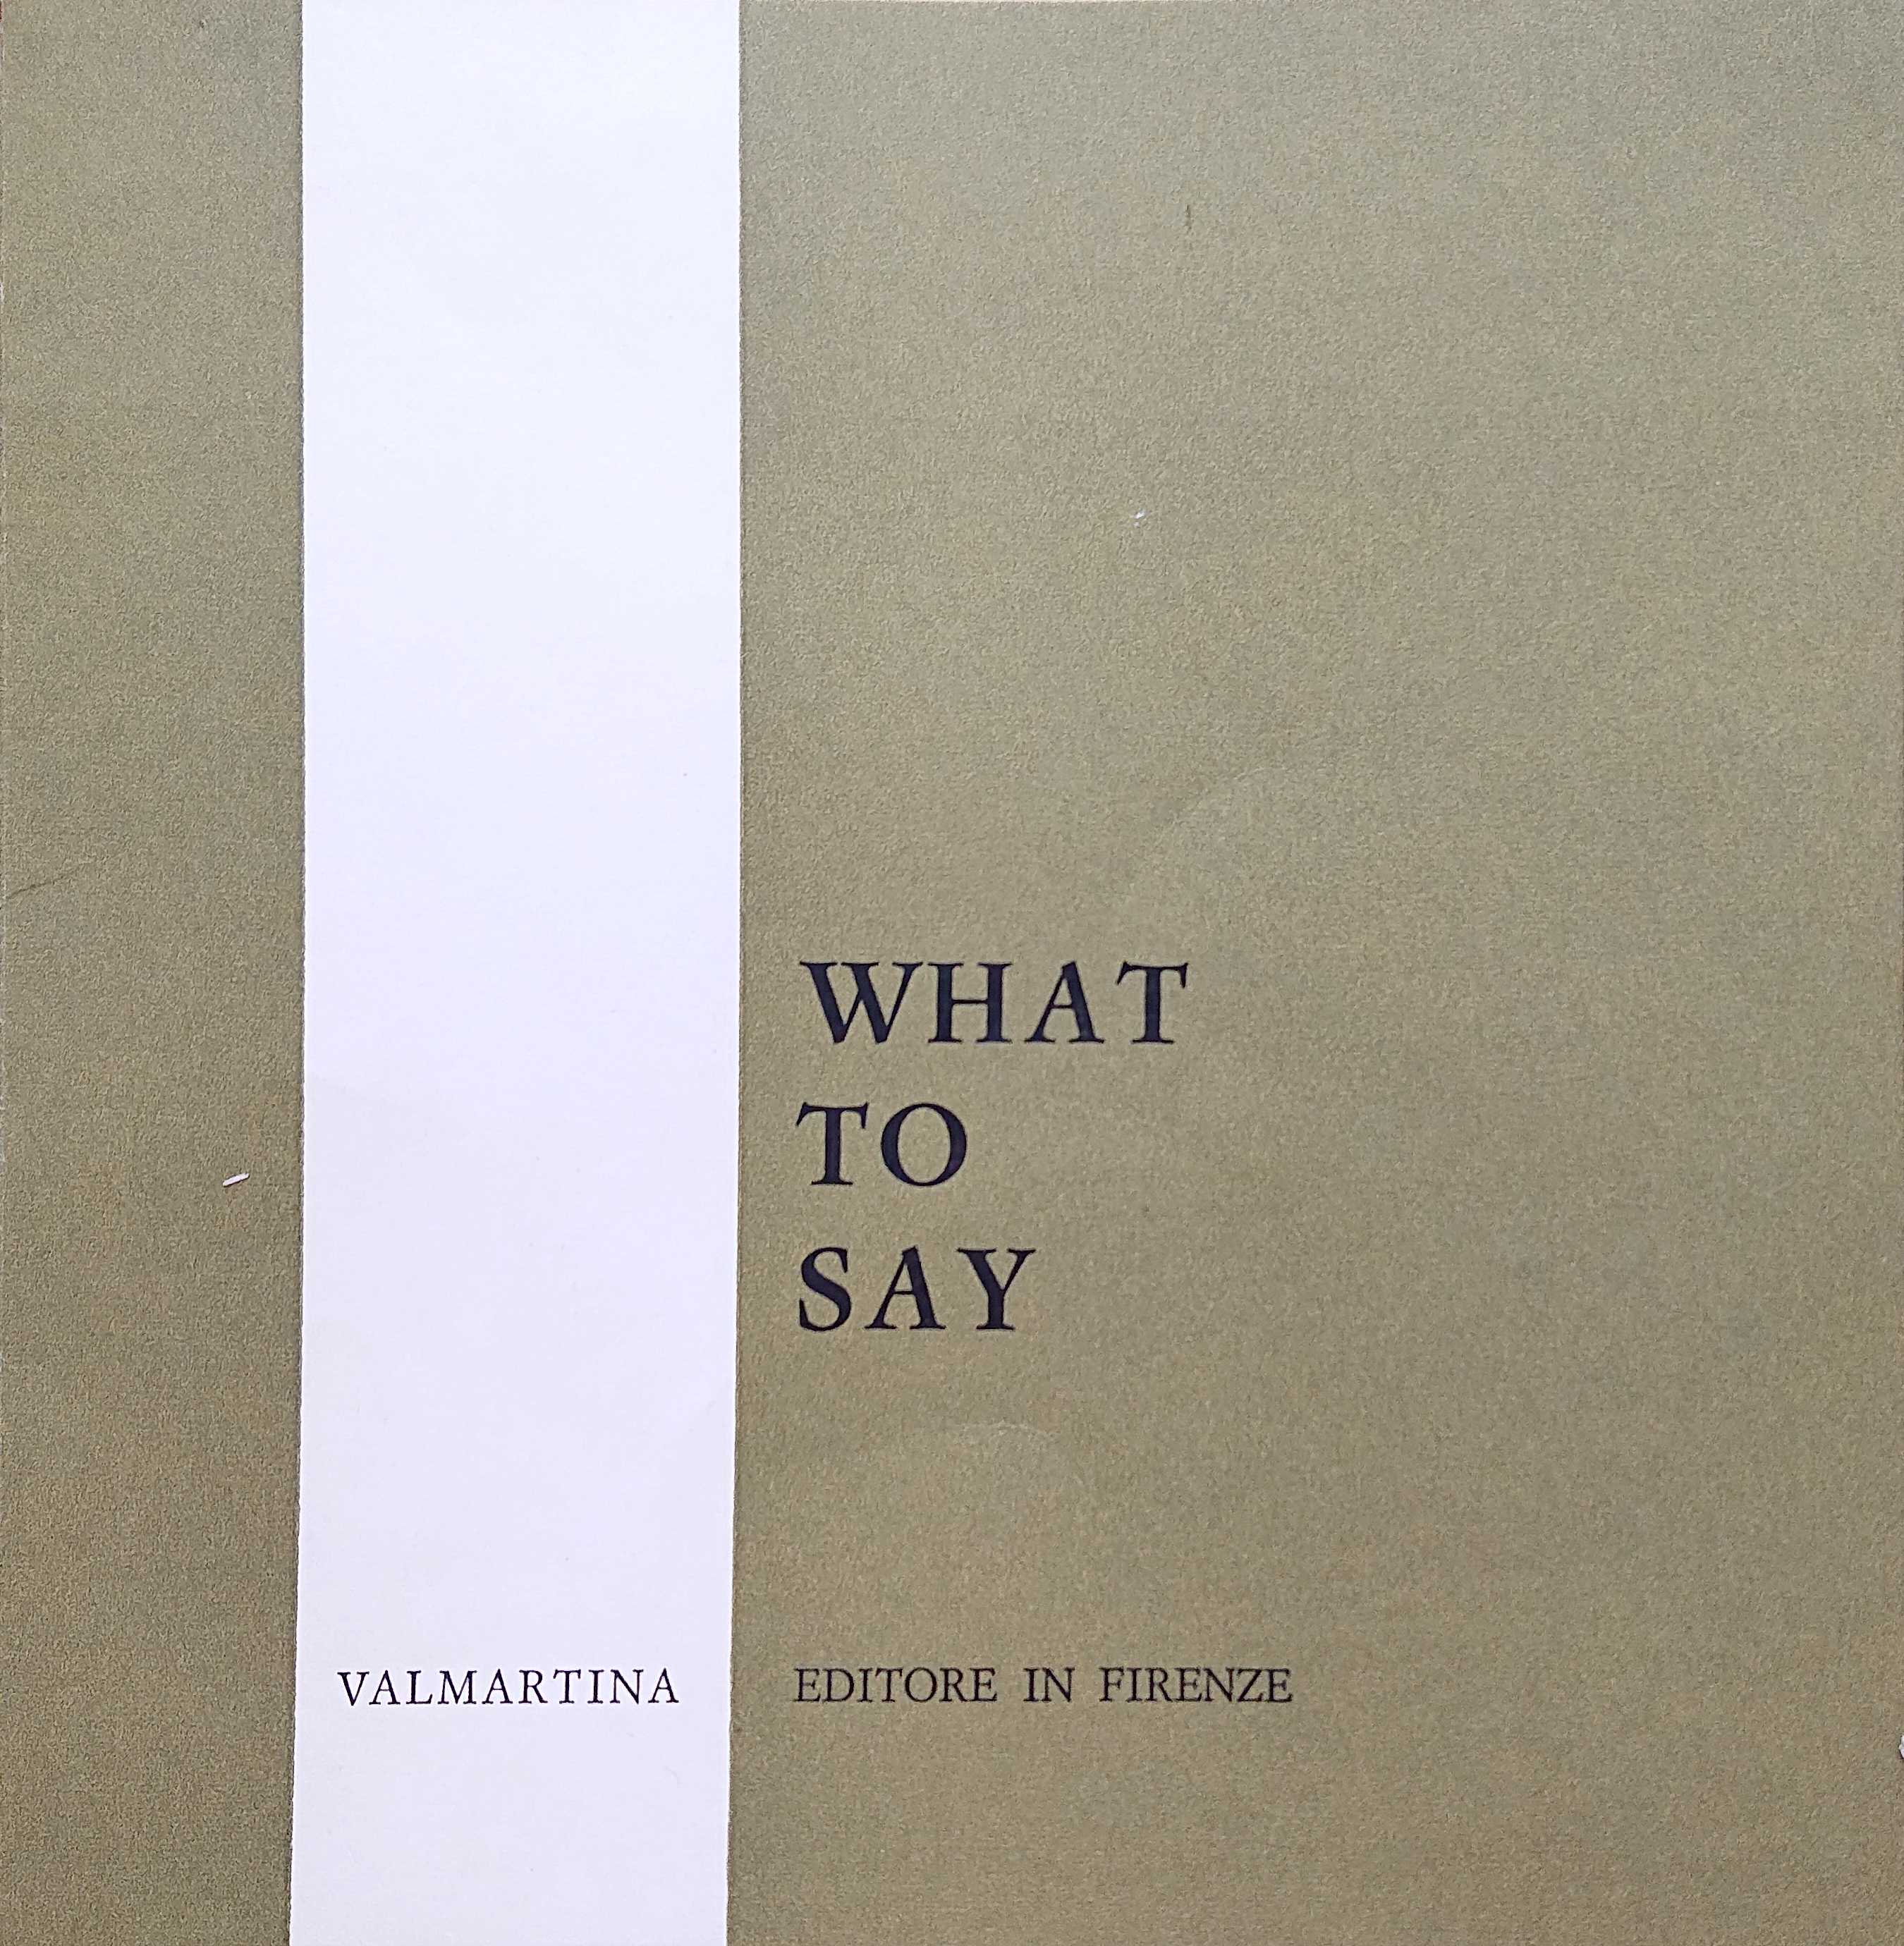 Picture of books-WTS 1-2 What to say (Cosa dire e come dirlo) by artist Licia Barocas from the BBC books - Records and Tapes library